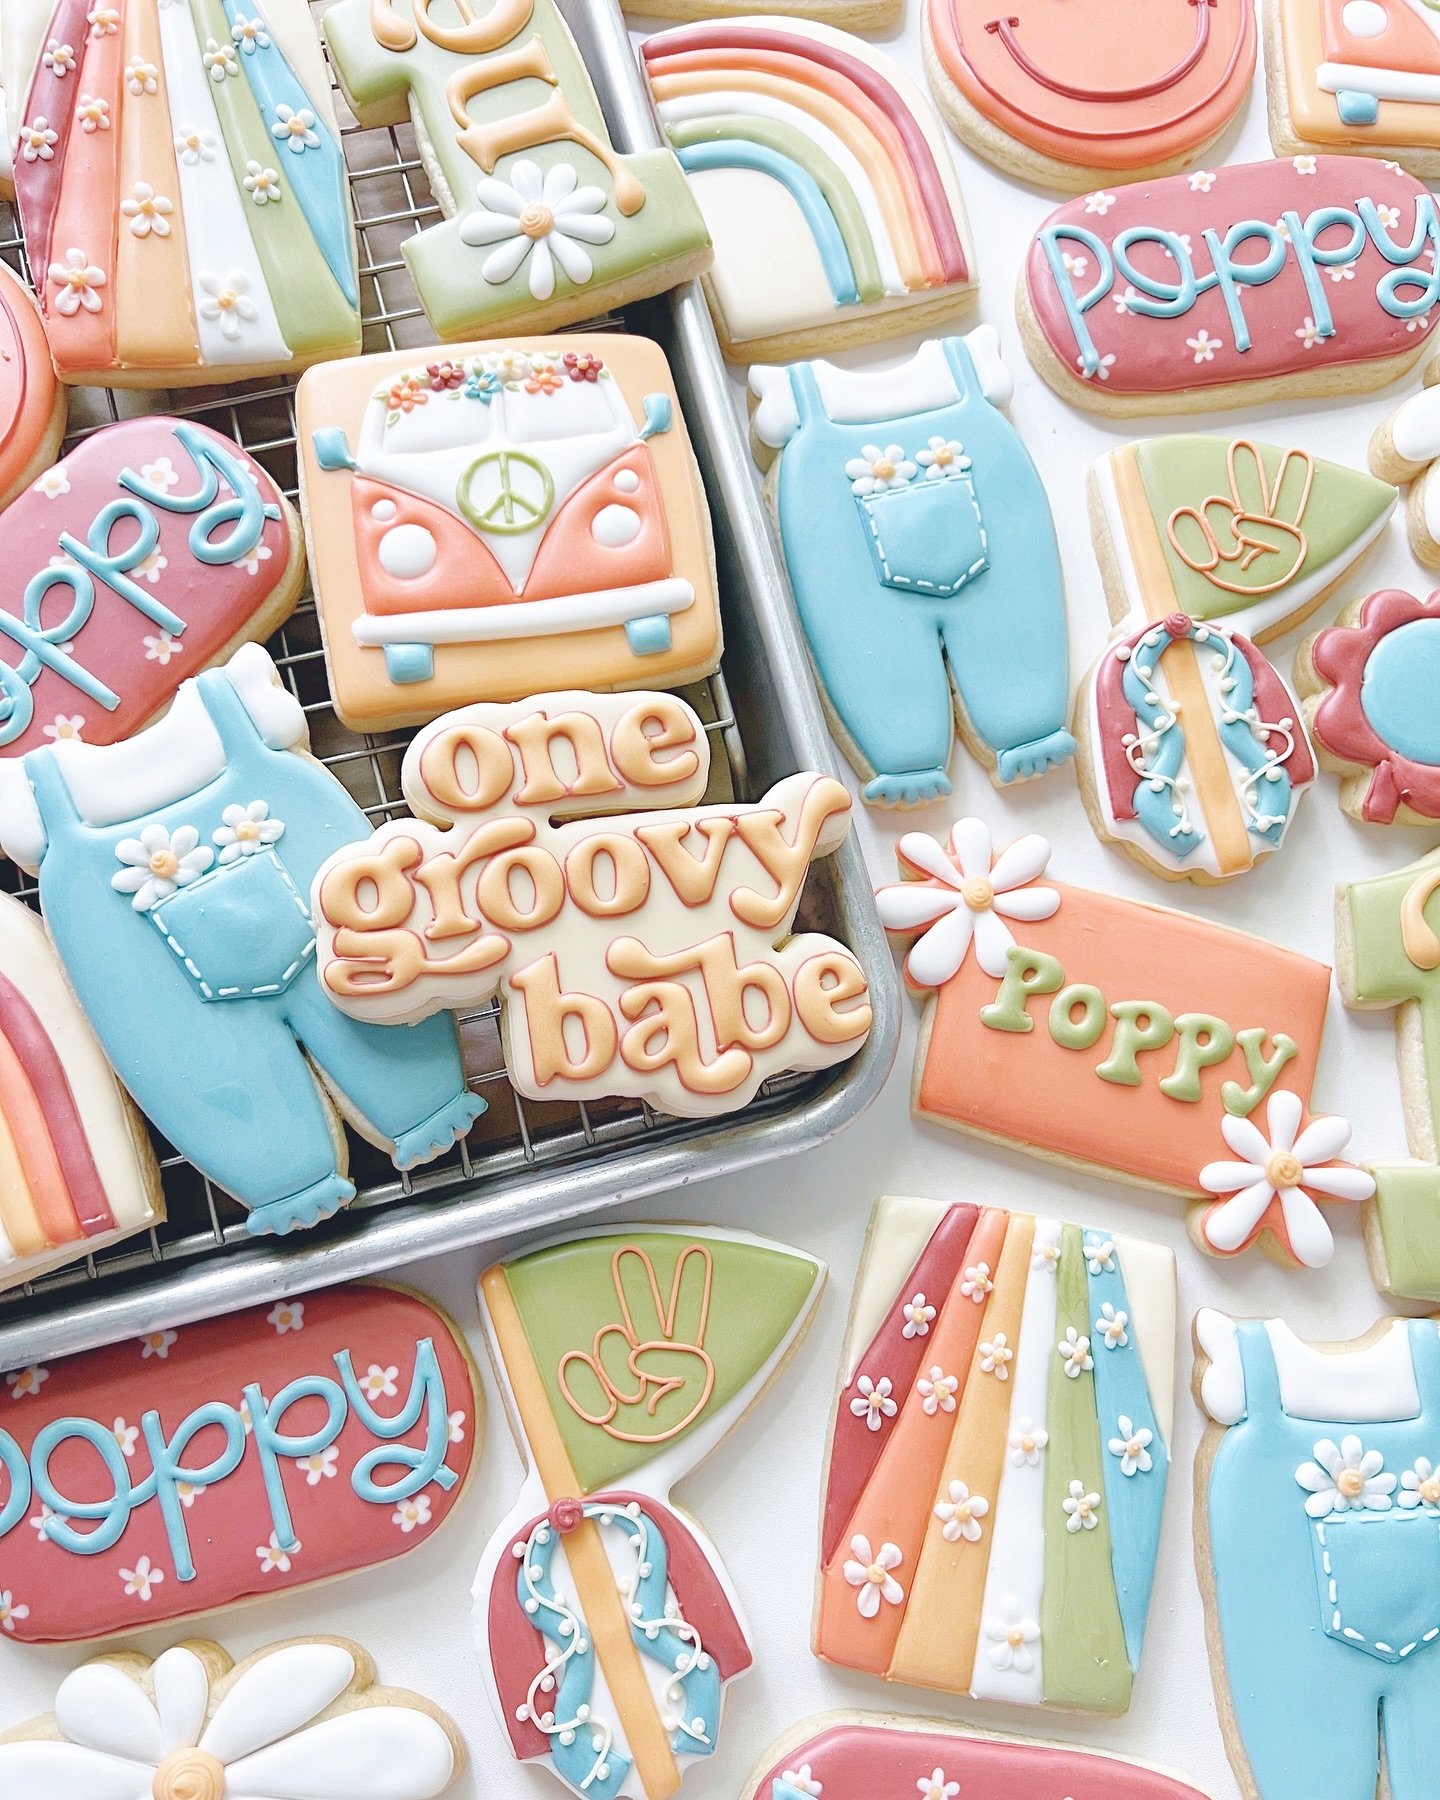 This groovy babe is ready to party! 

#firstbirthday #firstbirthdaycookies #groovycookies #groovybaby #groovy